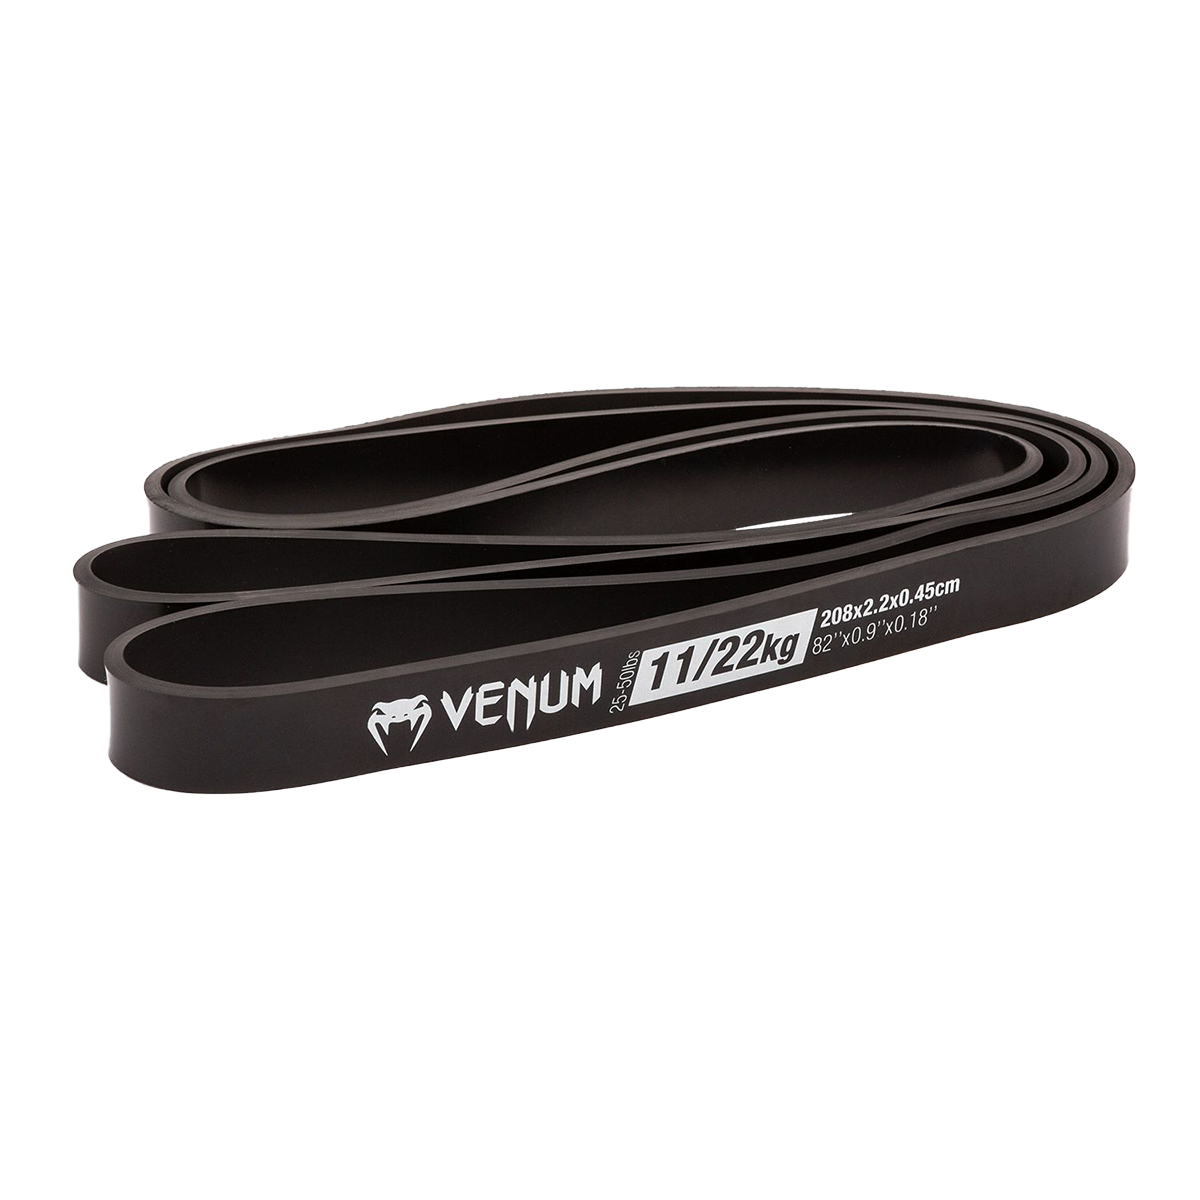 Venum Challenger Resistance Band Black - 25 - 50lbs - Click Image to Close